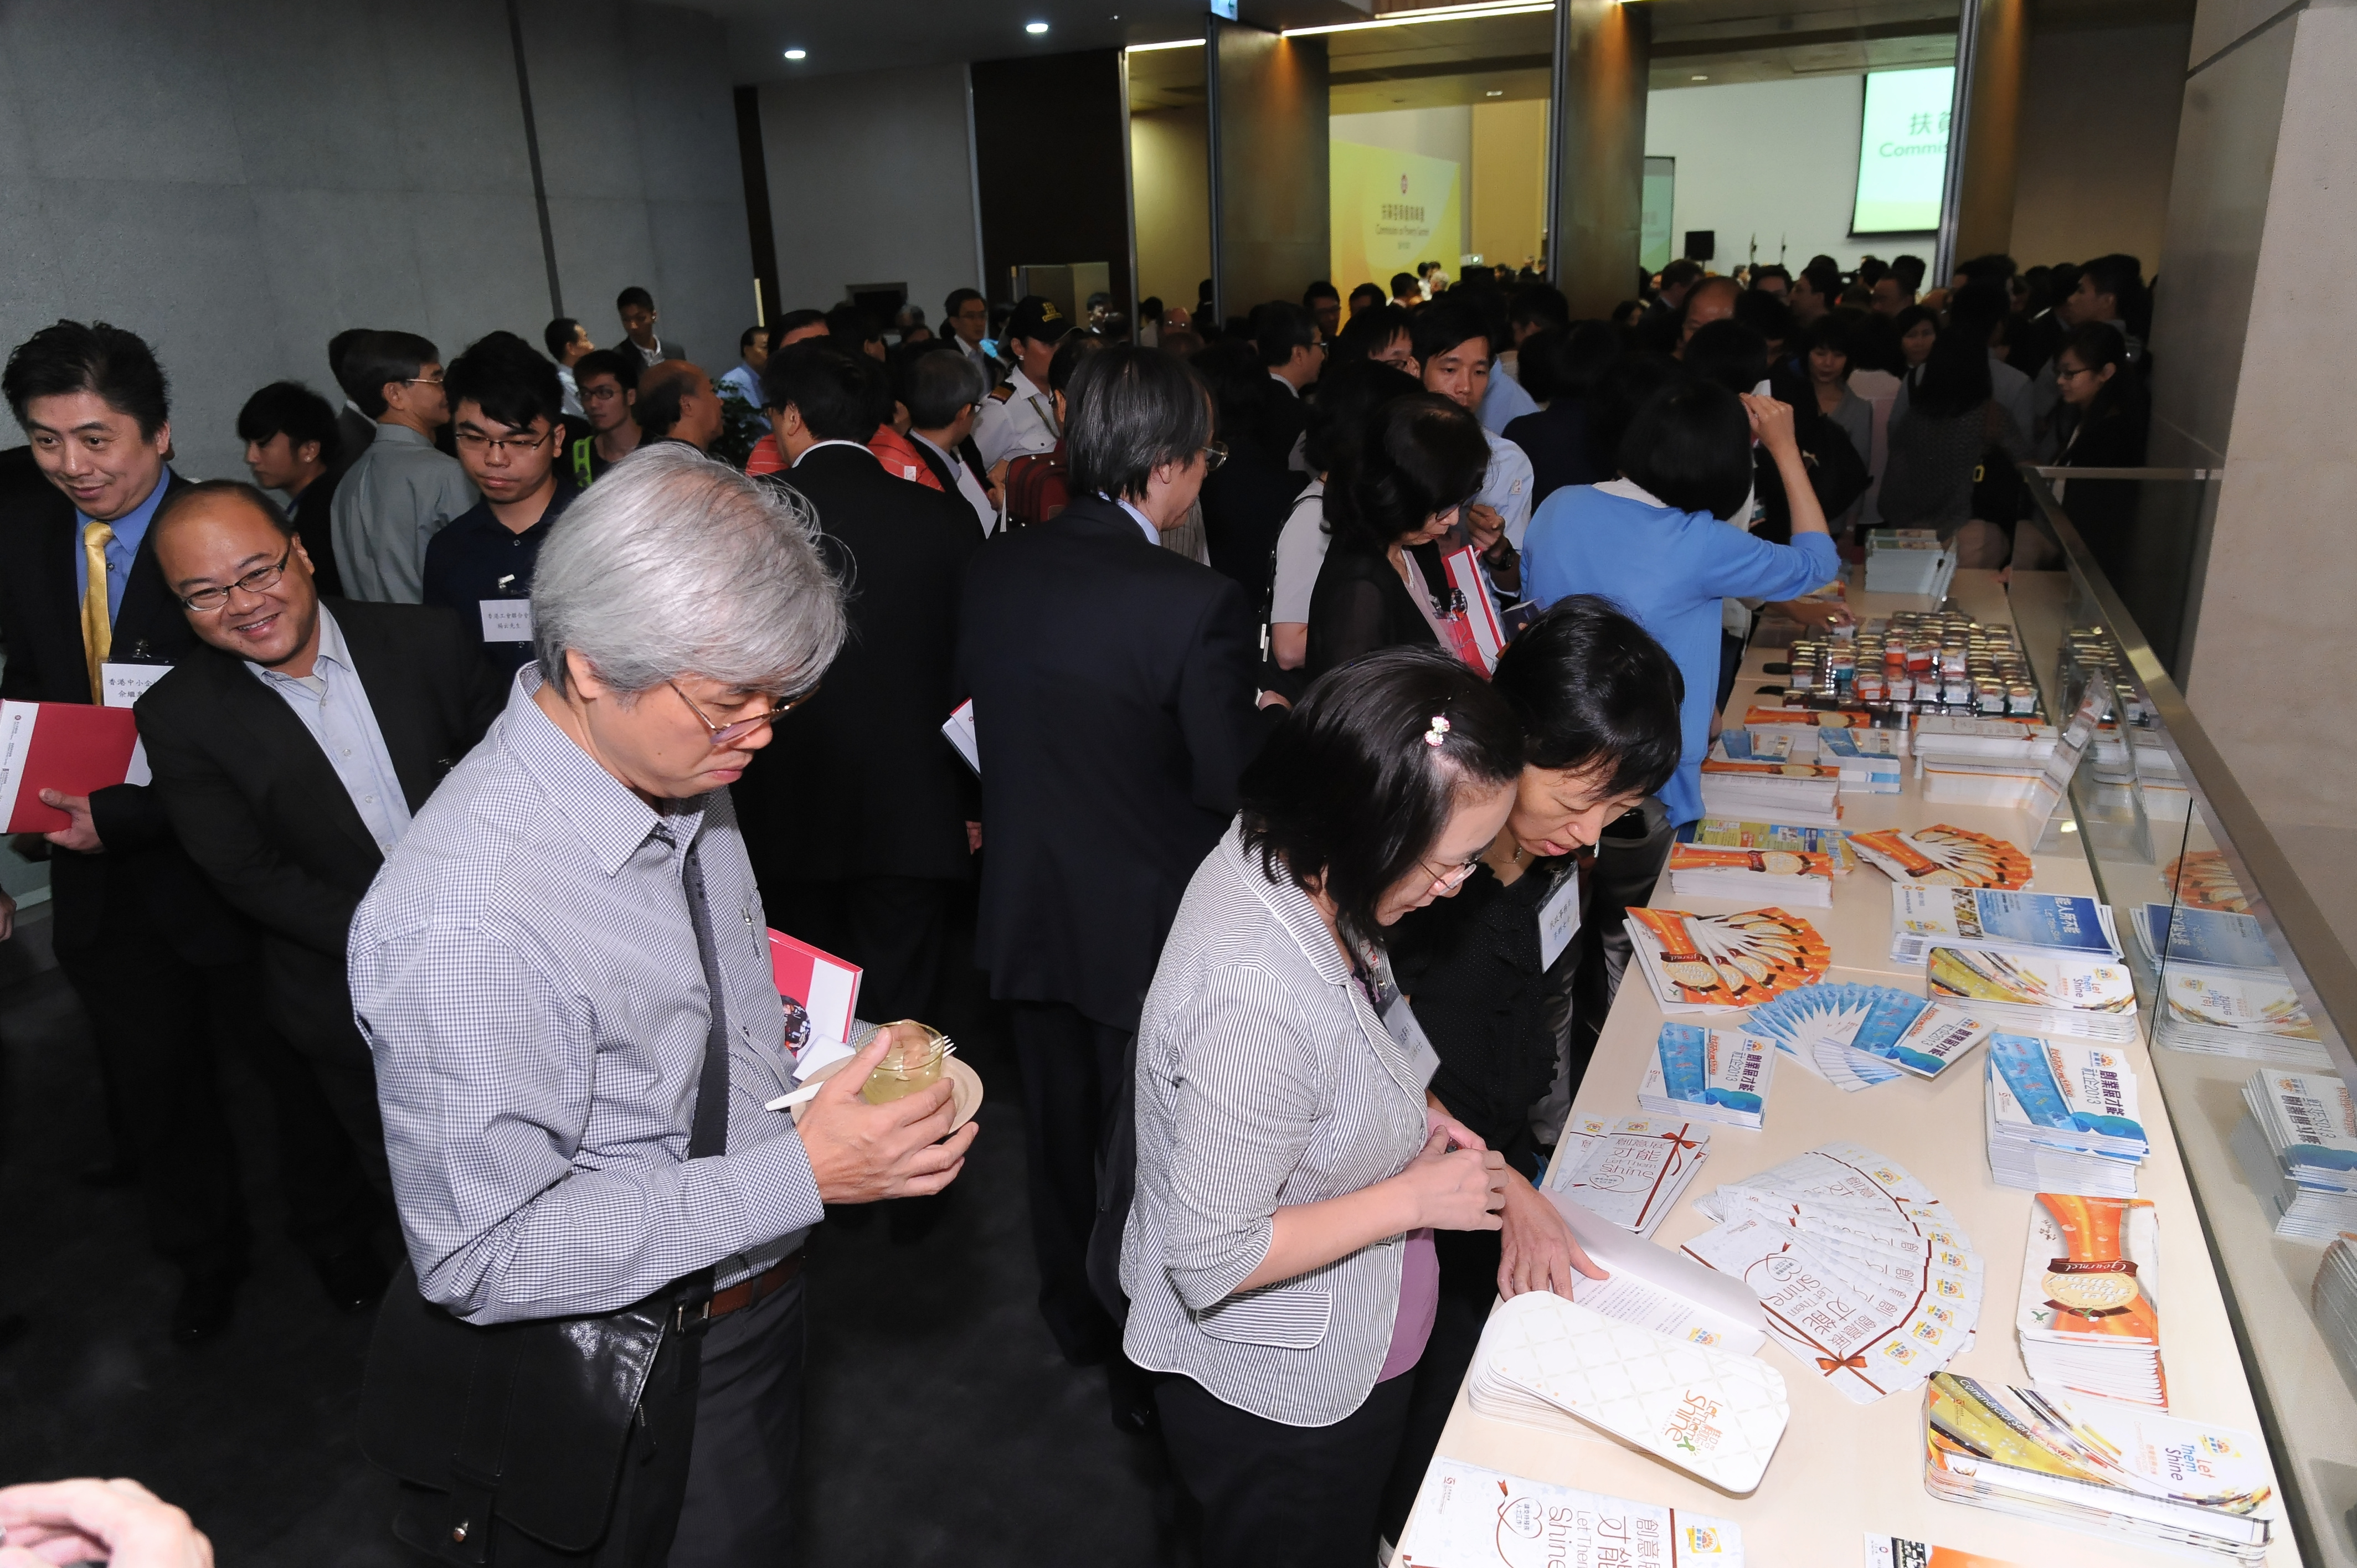 The Social Welfare Department and the Labour Department set up an information corner at the Launching Ceremony to provide information on the measures and support services provided by the Government of the Hong Kong Special Administrative Region for promoting employment opportunities of persons with disabilities